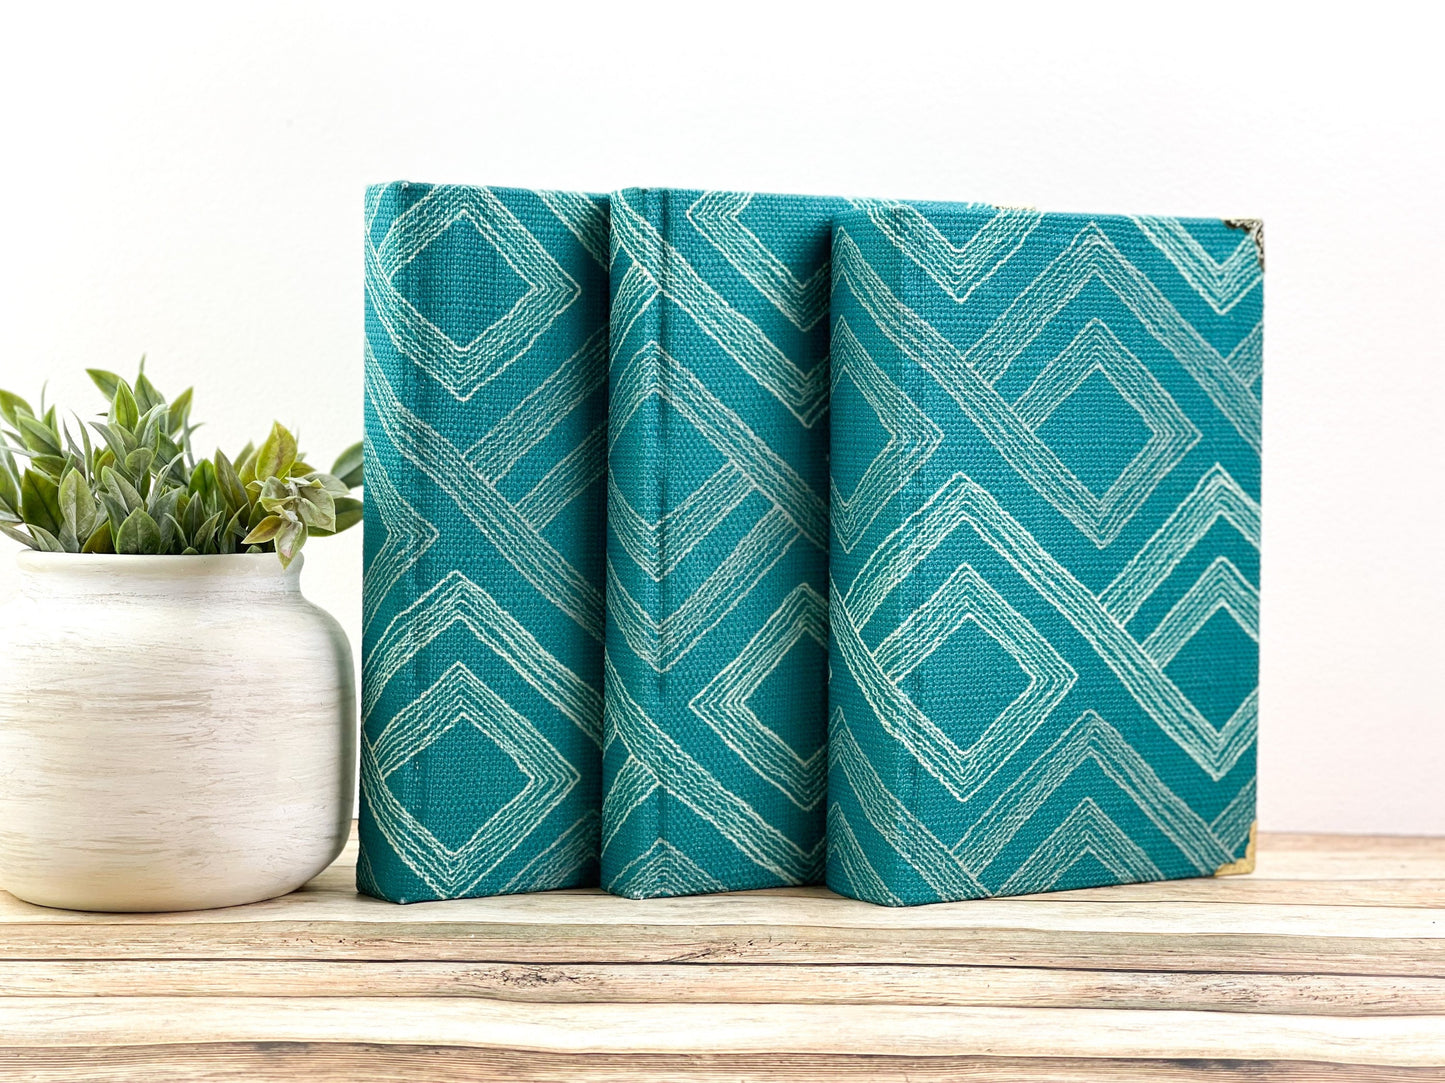 Turquoise Book Set